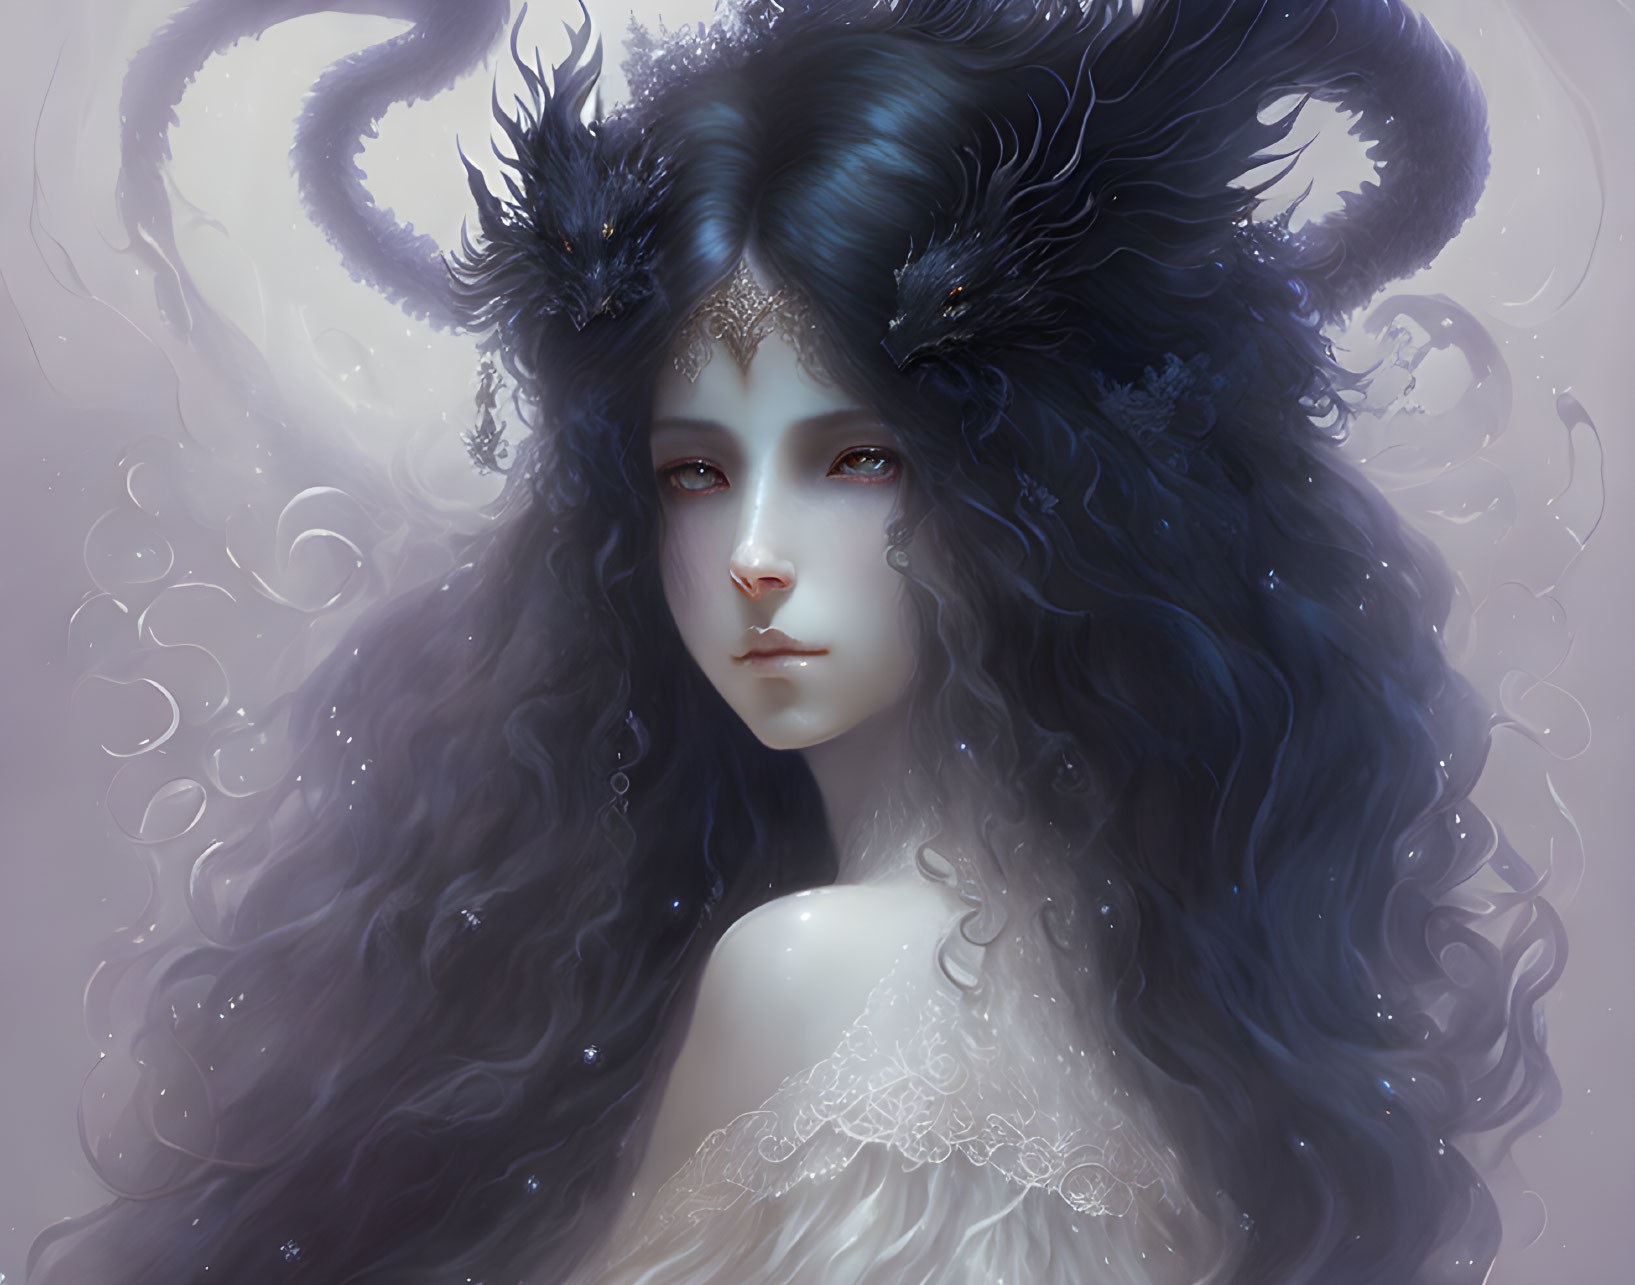 Dark-haired female figure with ornate horns and ethereal accents.